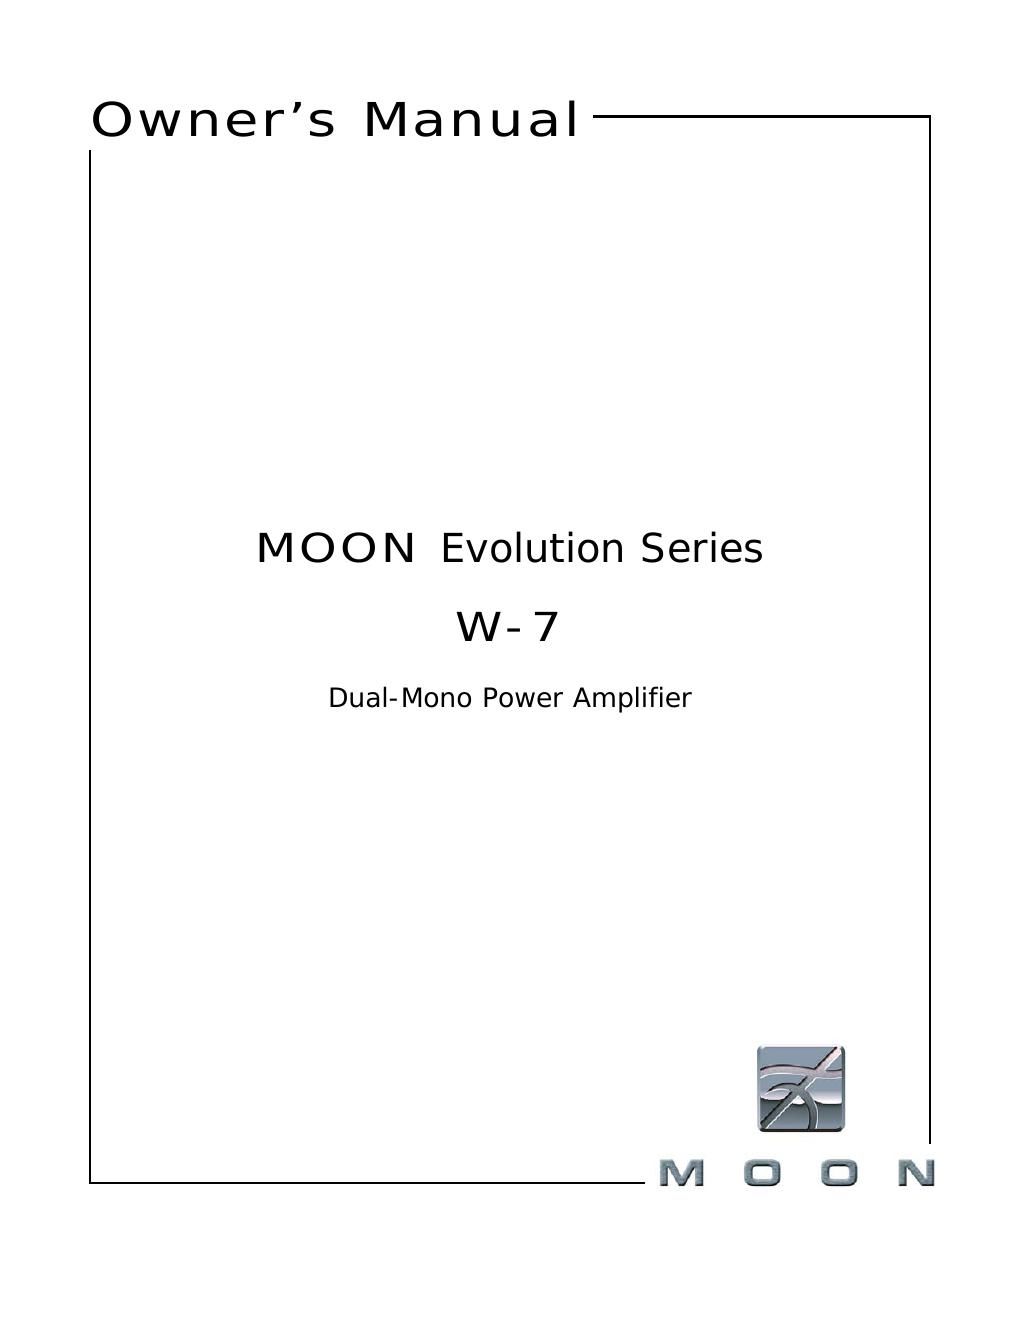 moon w 7 owners manual